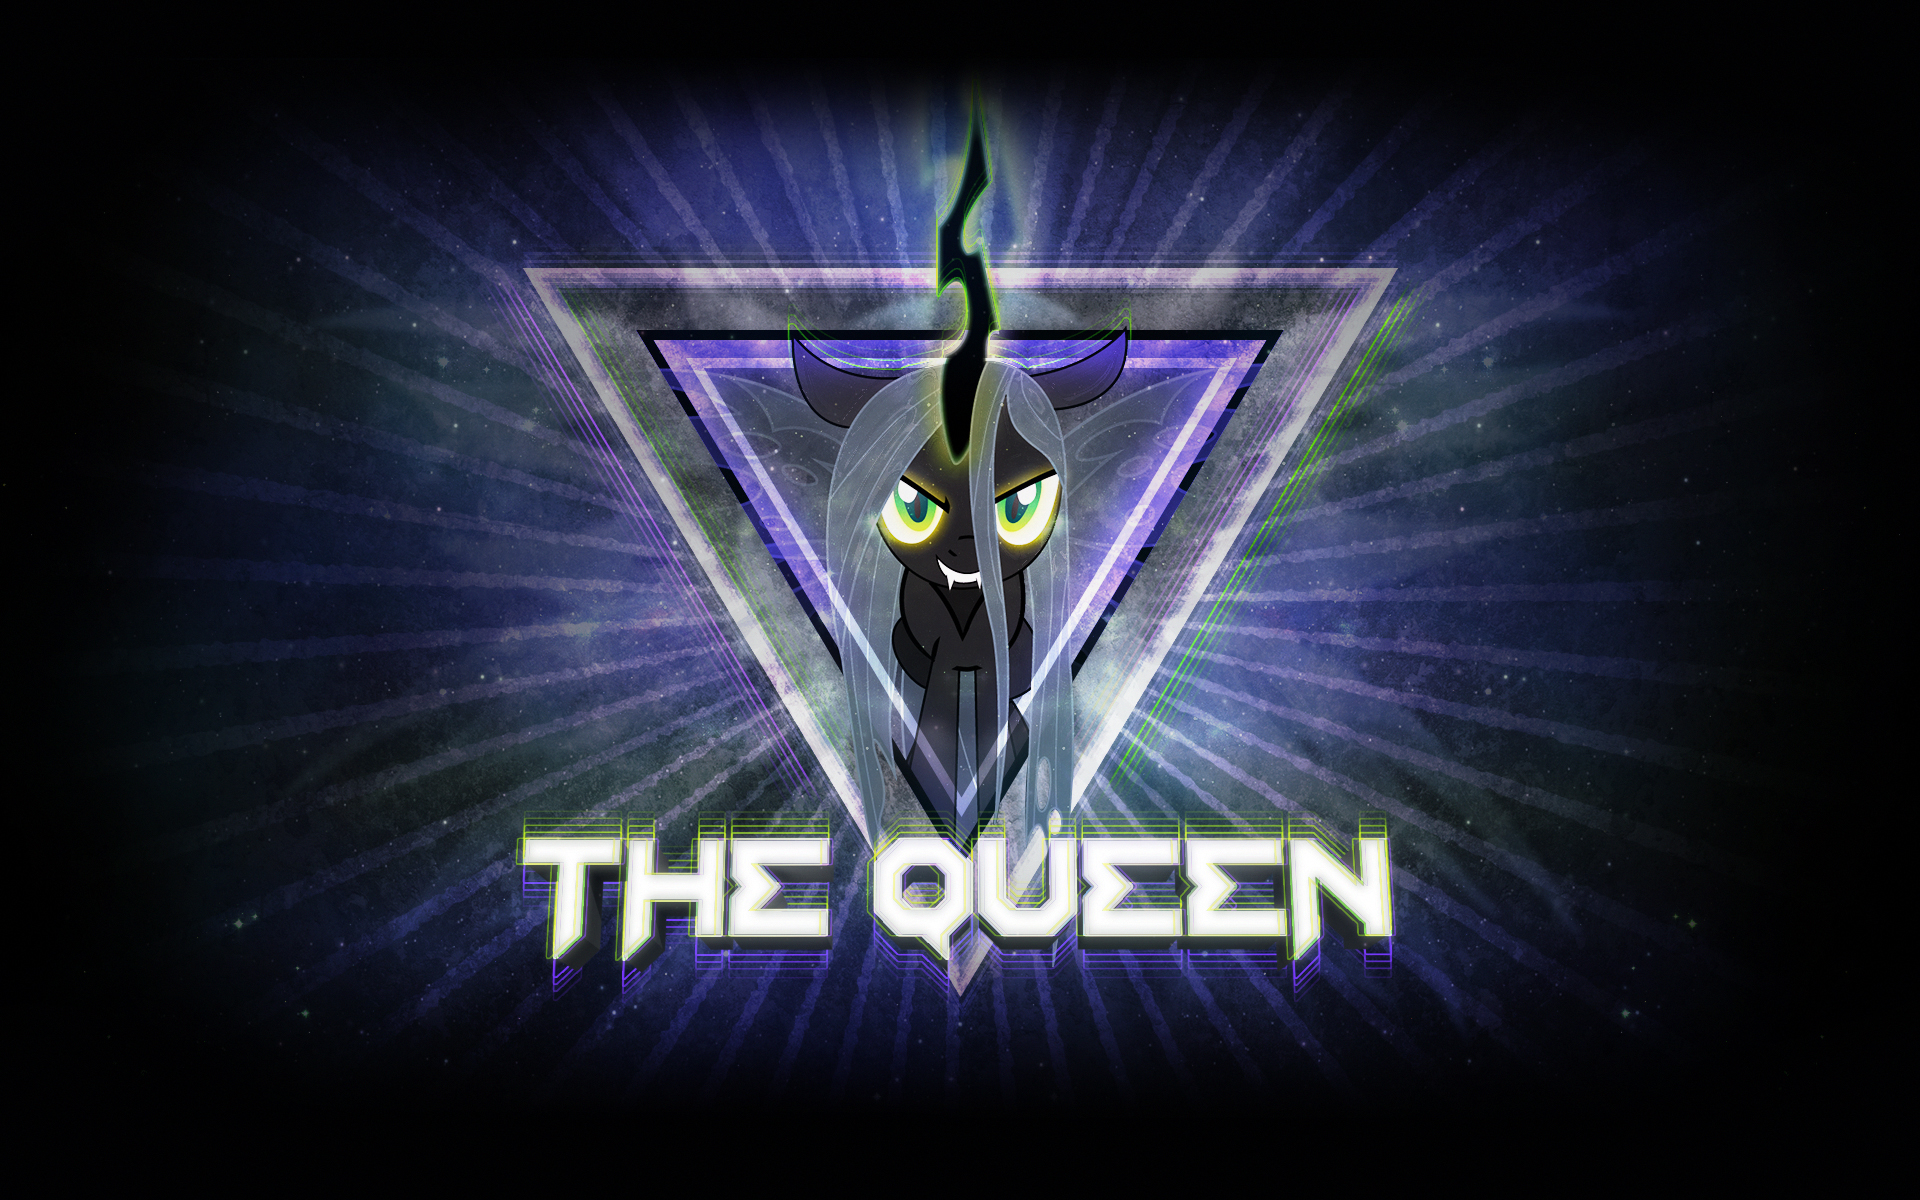 Wallpaper ~ The Queen (1920x1200). by FatesHero and Mackaged